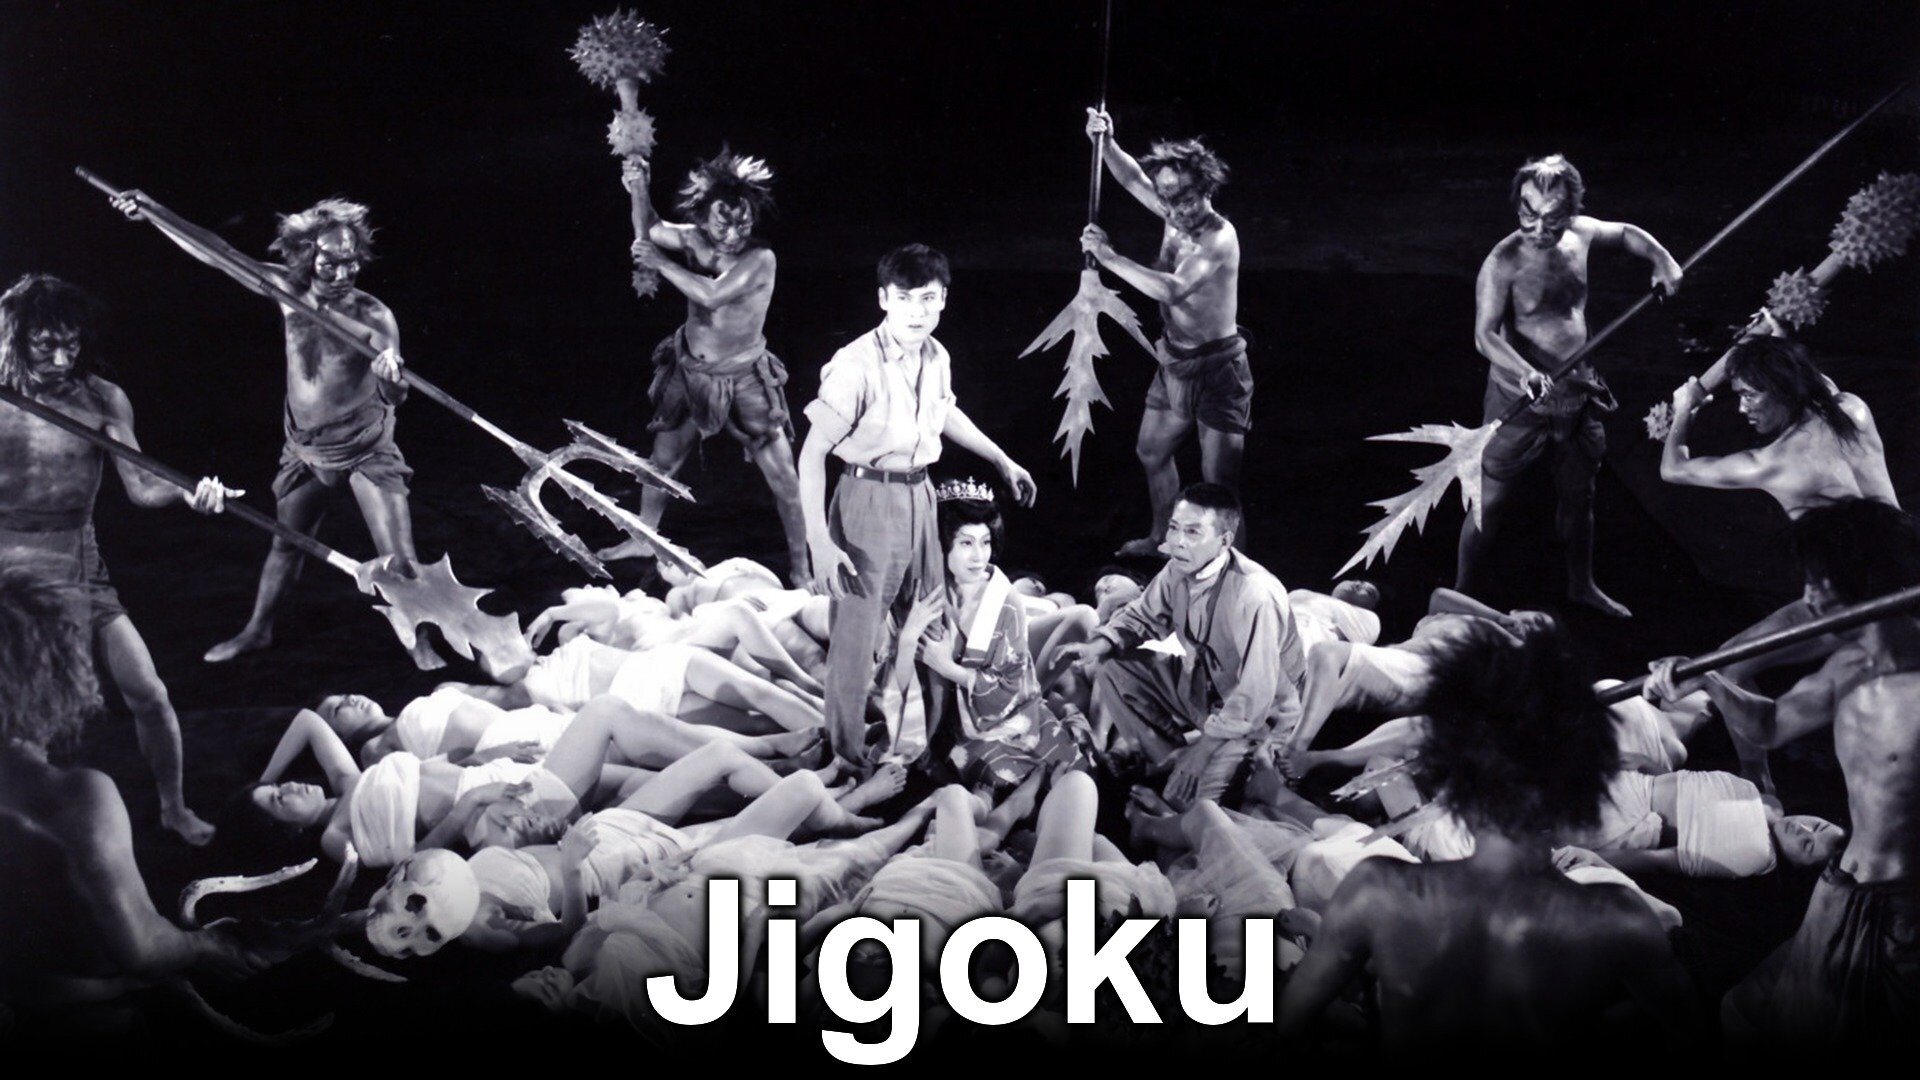 34-facts-about-the-movie-jigoku